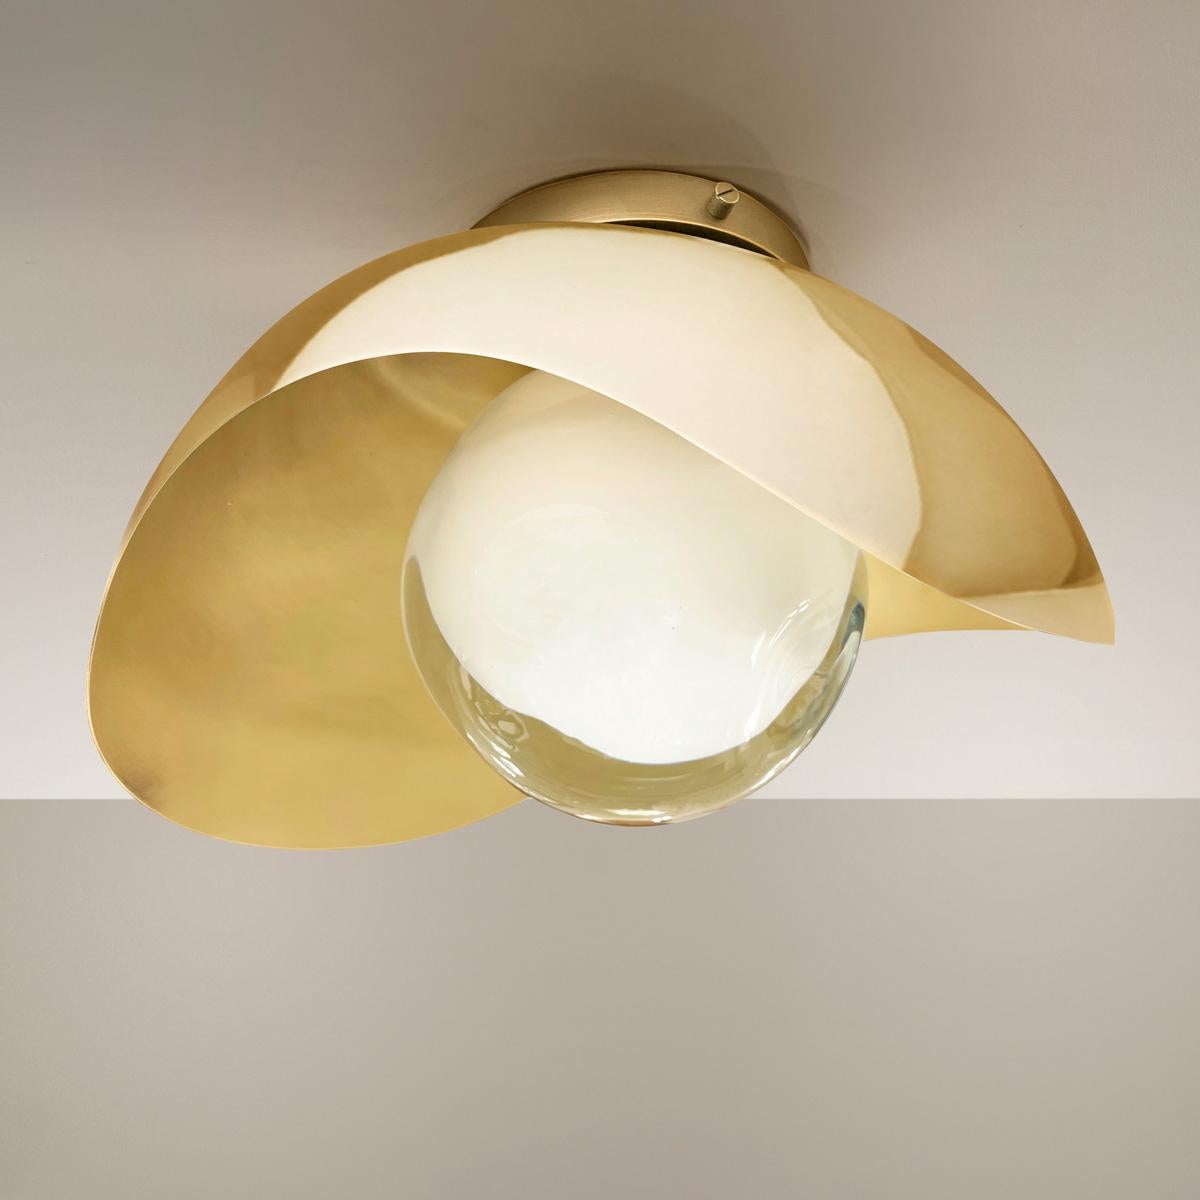 Perla Flushmount Ceiling Light by Gaspare Asaro-Satin Brass/Polished Nickel For Sale 2